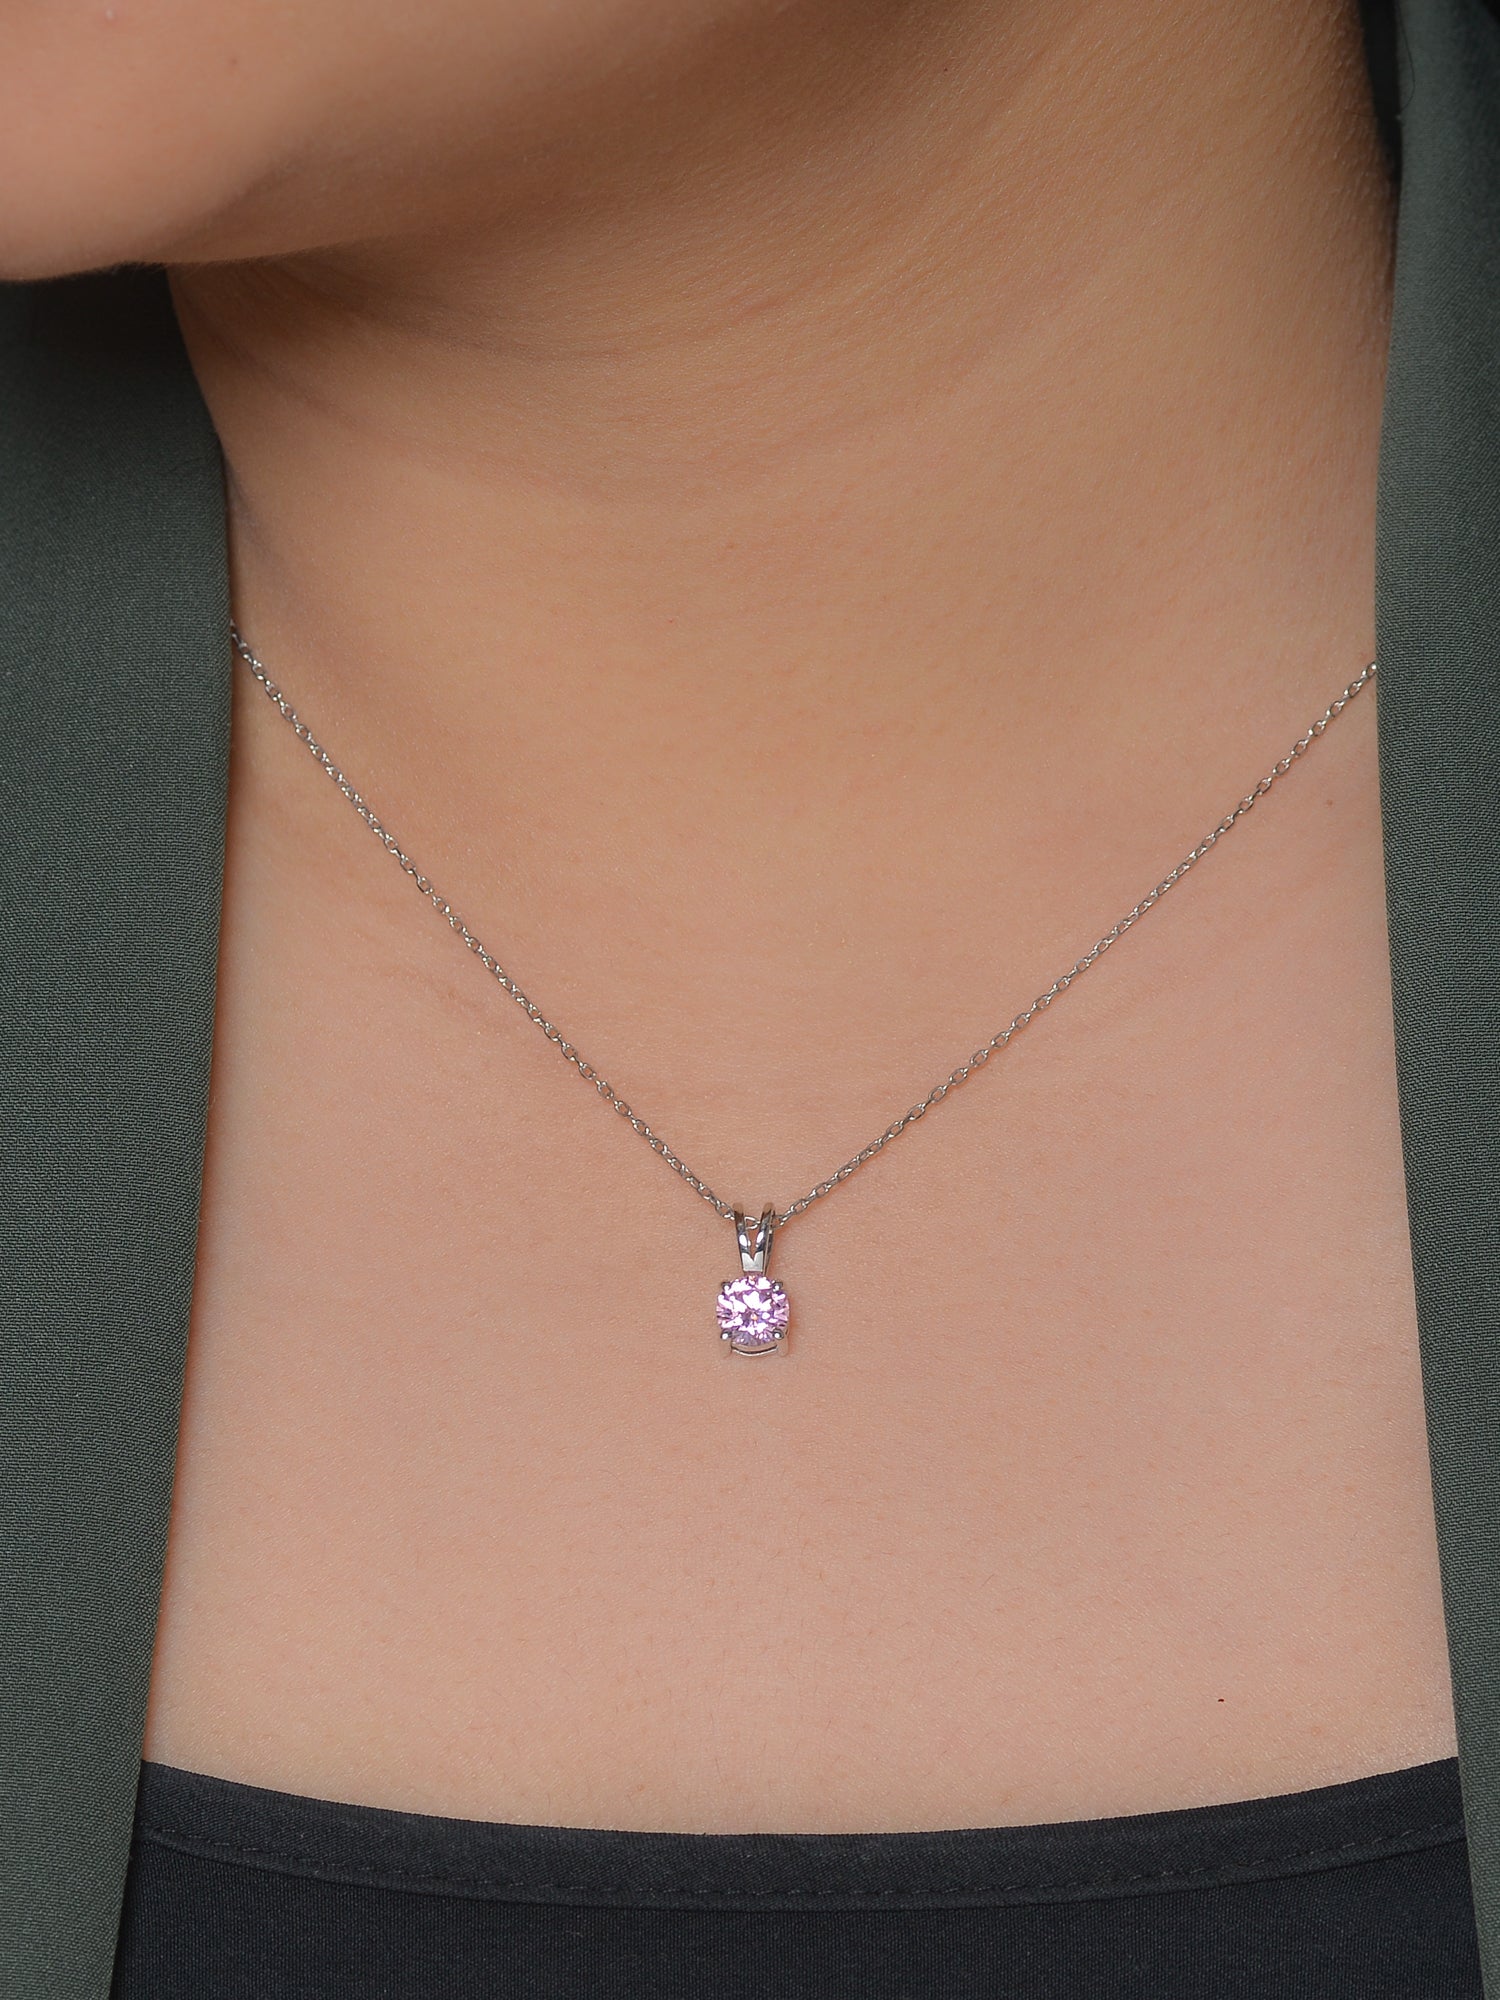 1 CARAT PINK STONE PENDANT NECKLACE IN PURE SILVER FOR WOMAN-2